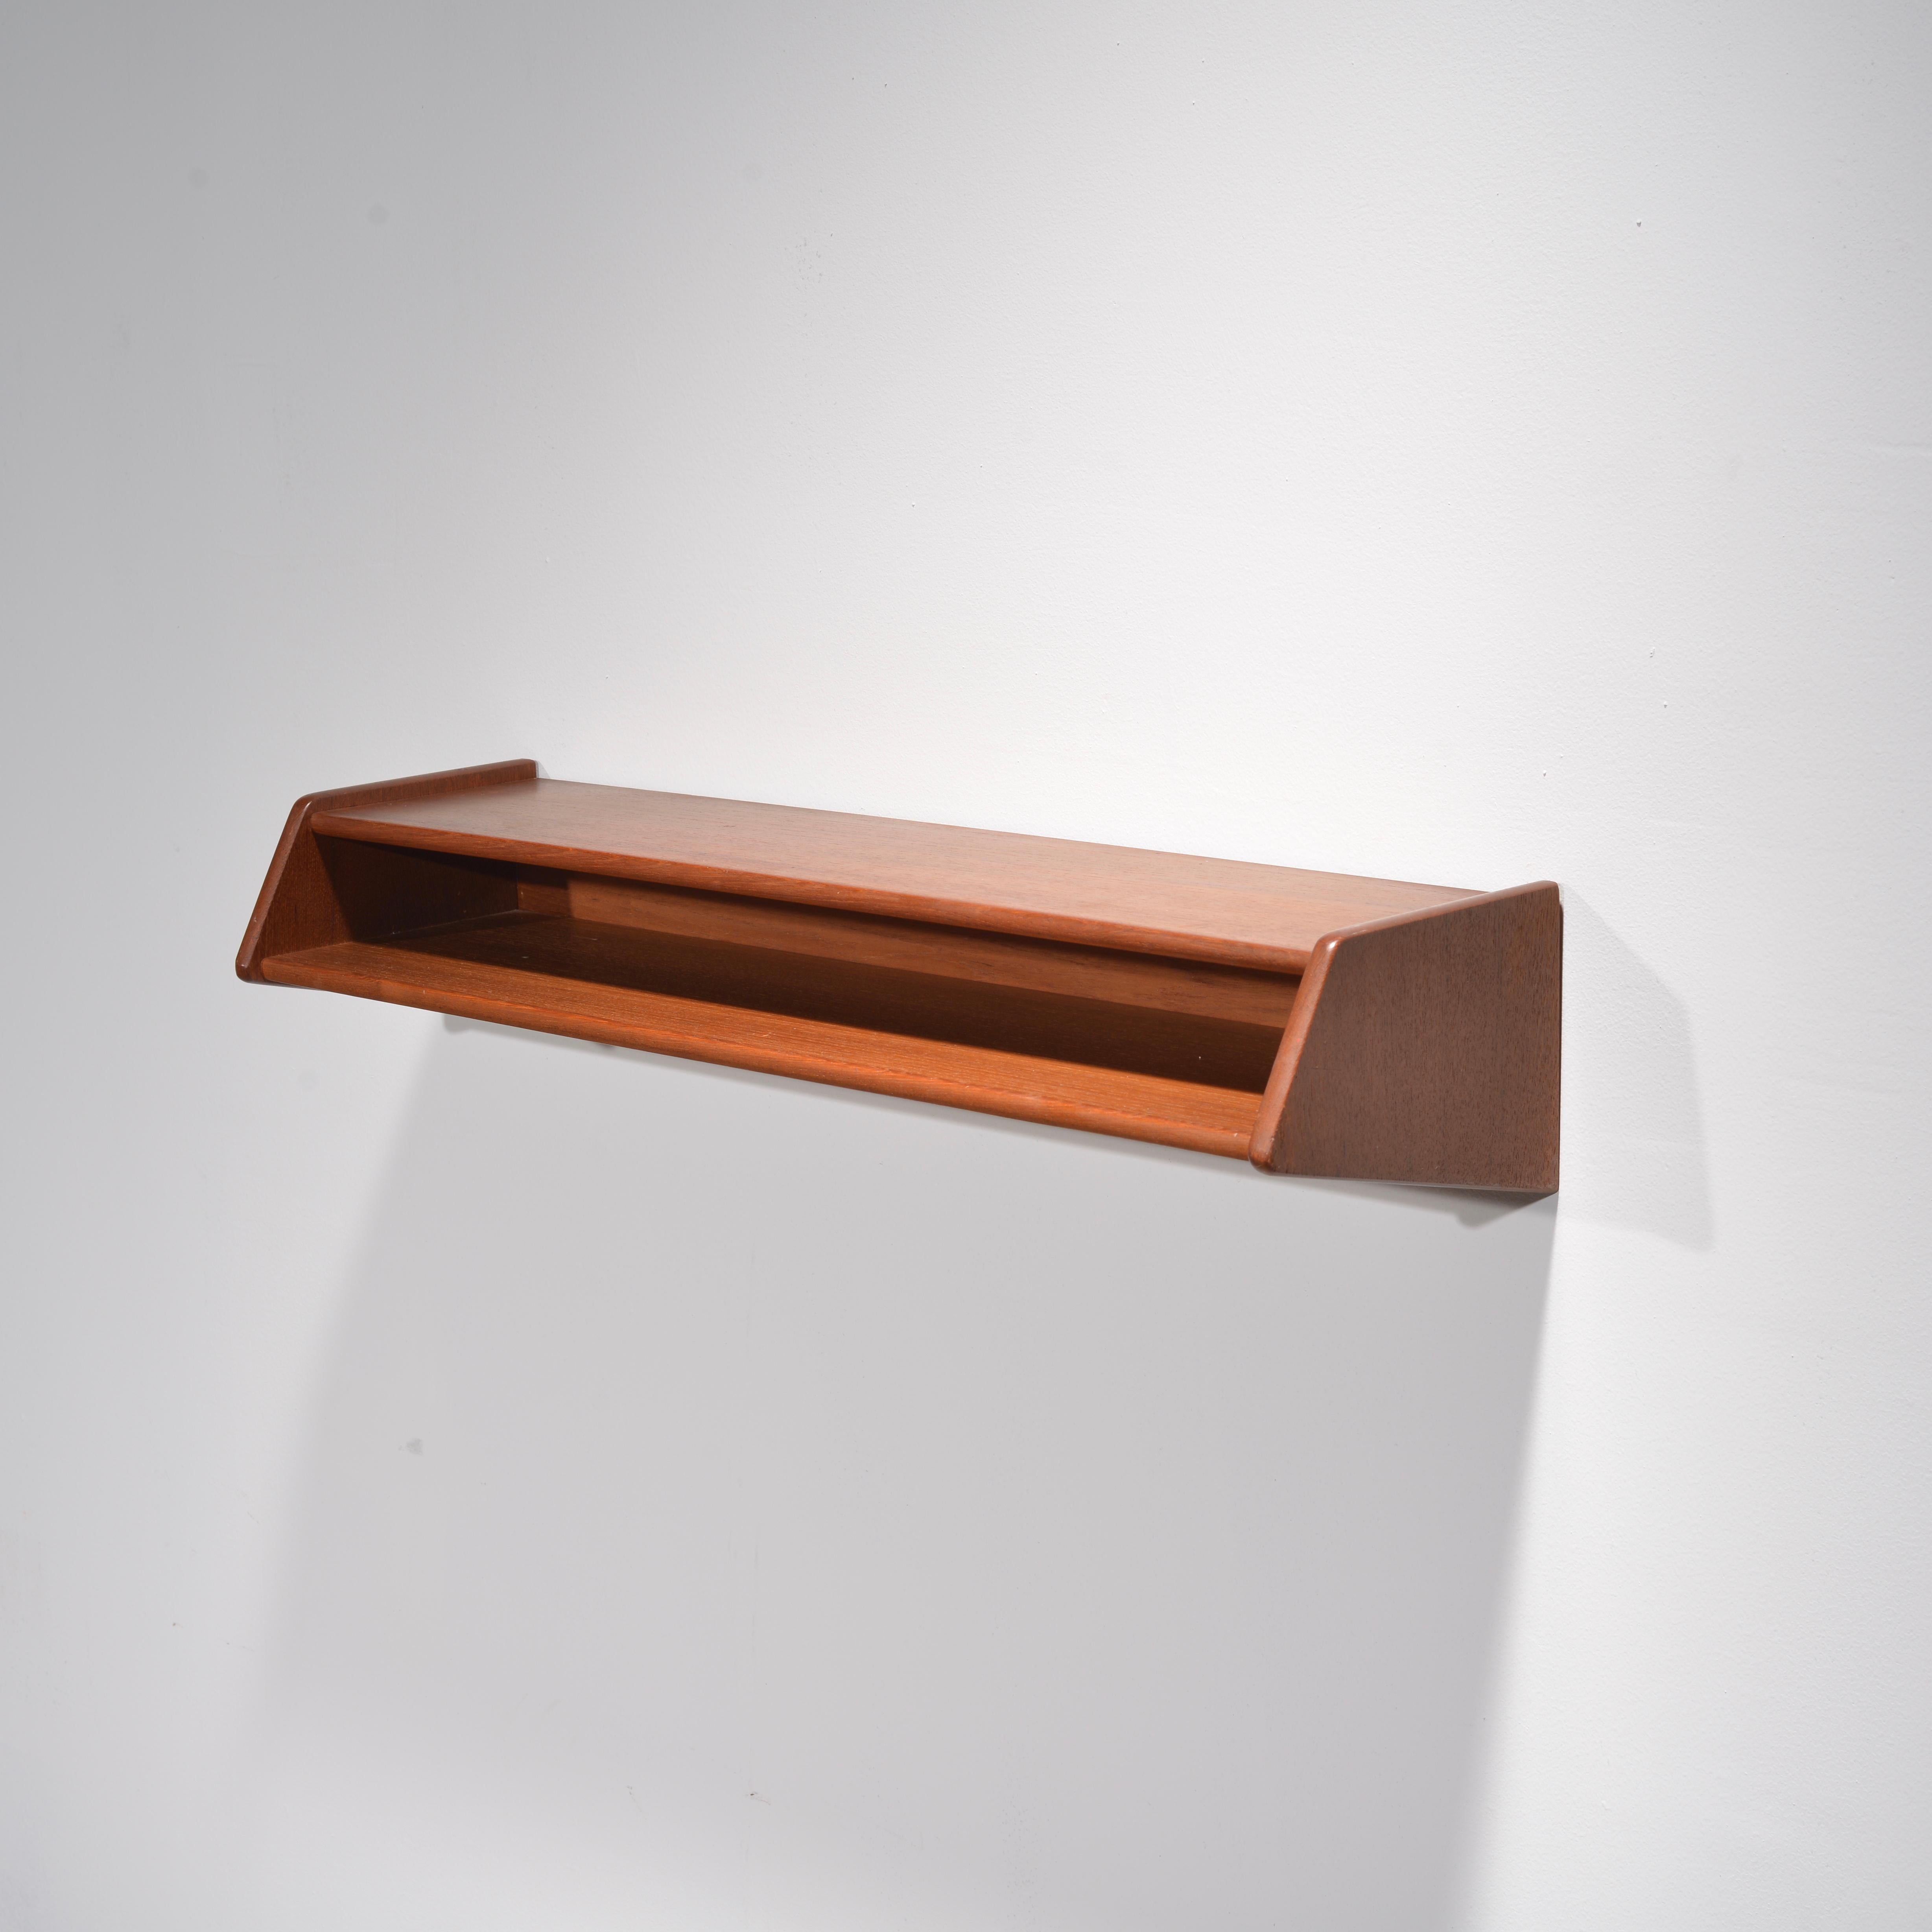 Early Danish modern wall-mounted teak shelf, circa 1950.
In excellent condition.